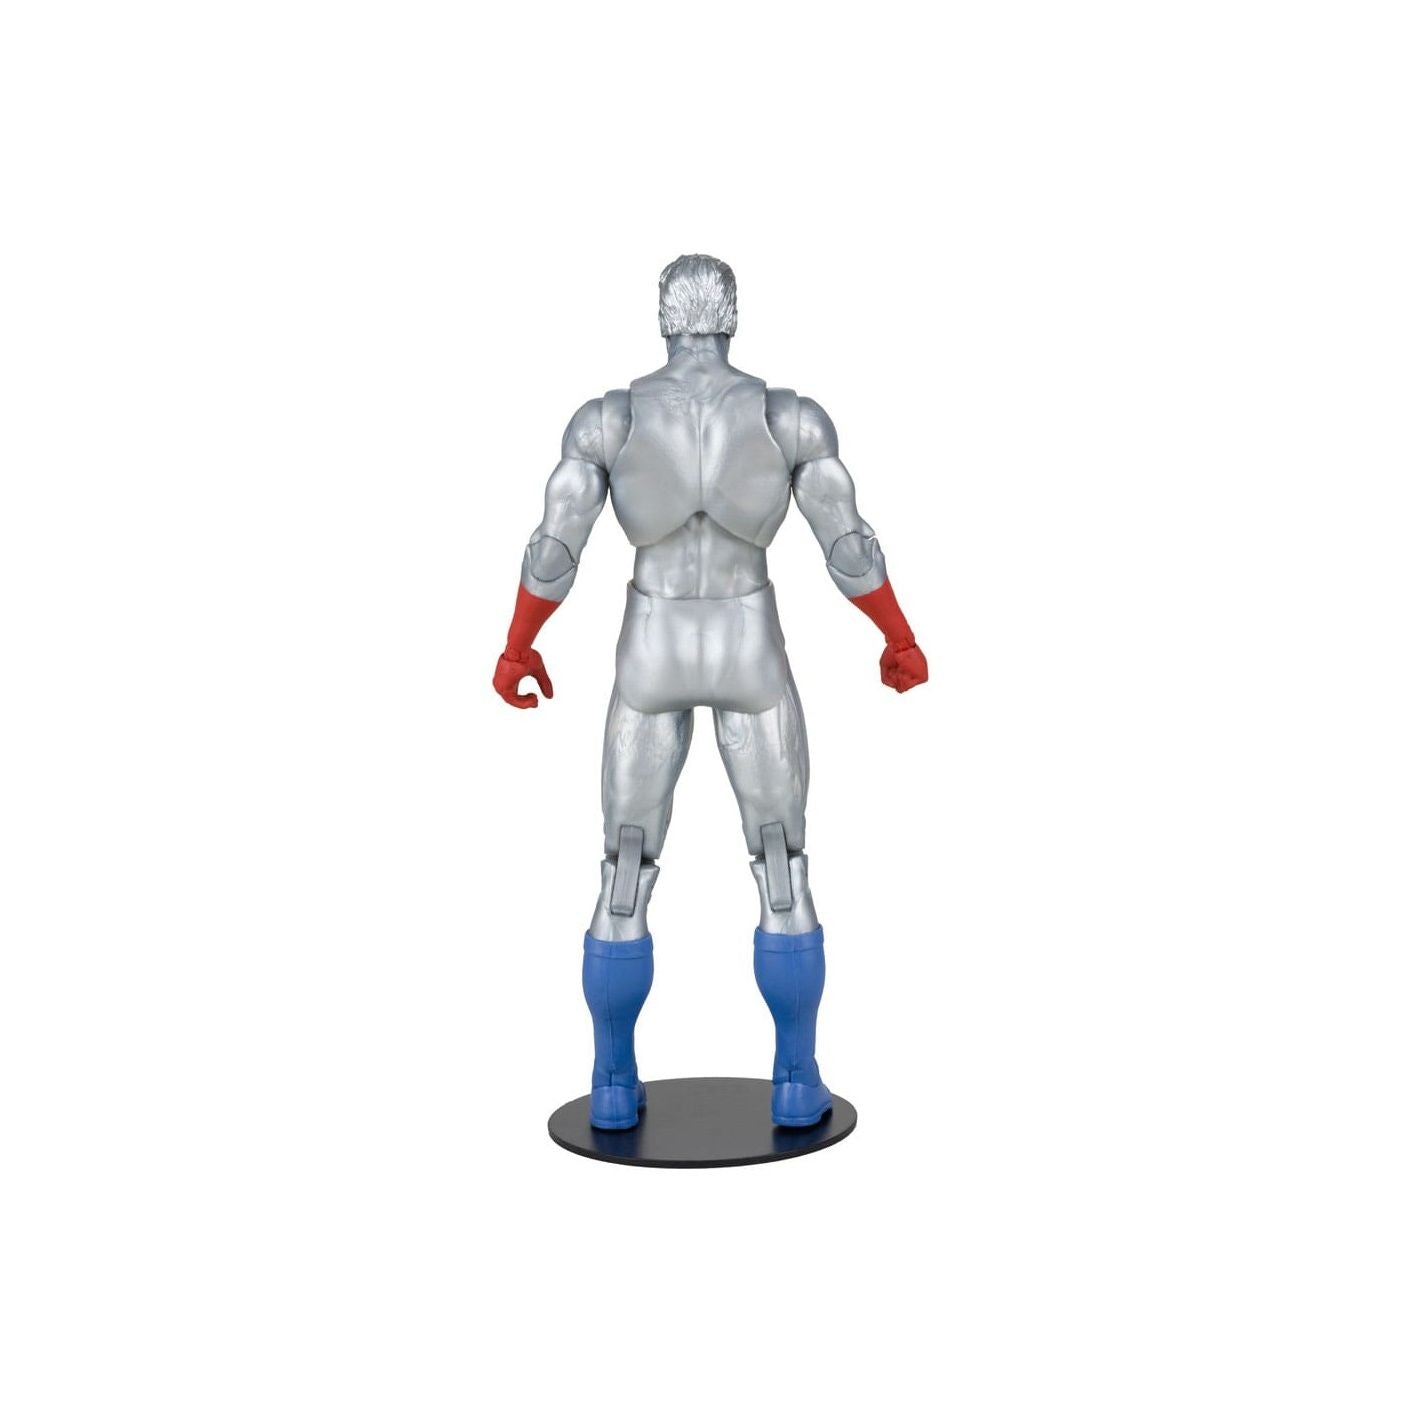 DC Multiverse Captain Atom (New 52) Gold Label Action Figure Toy back view - Heretoserveyou